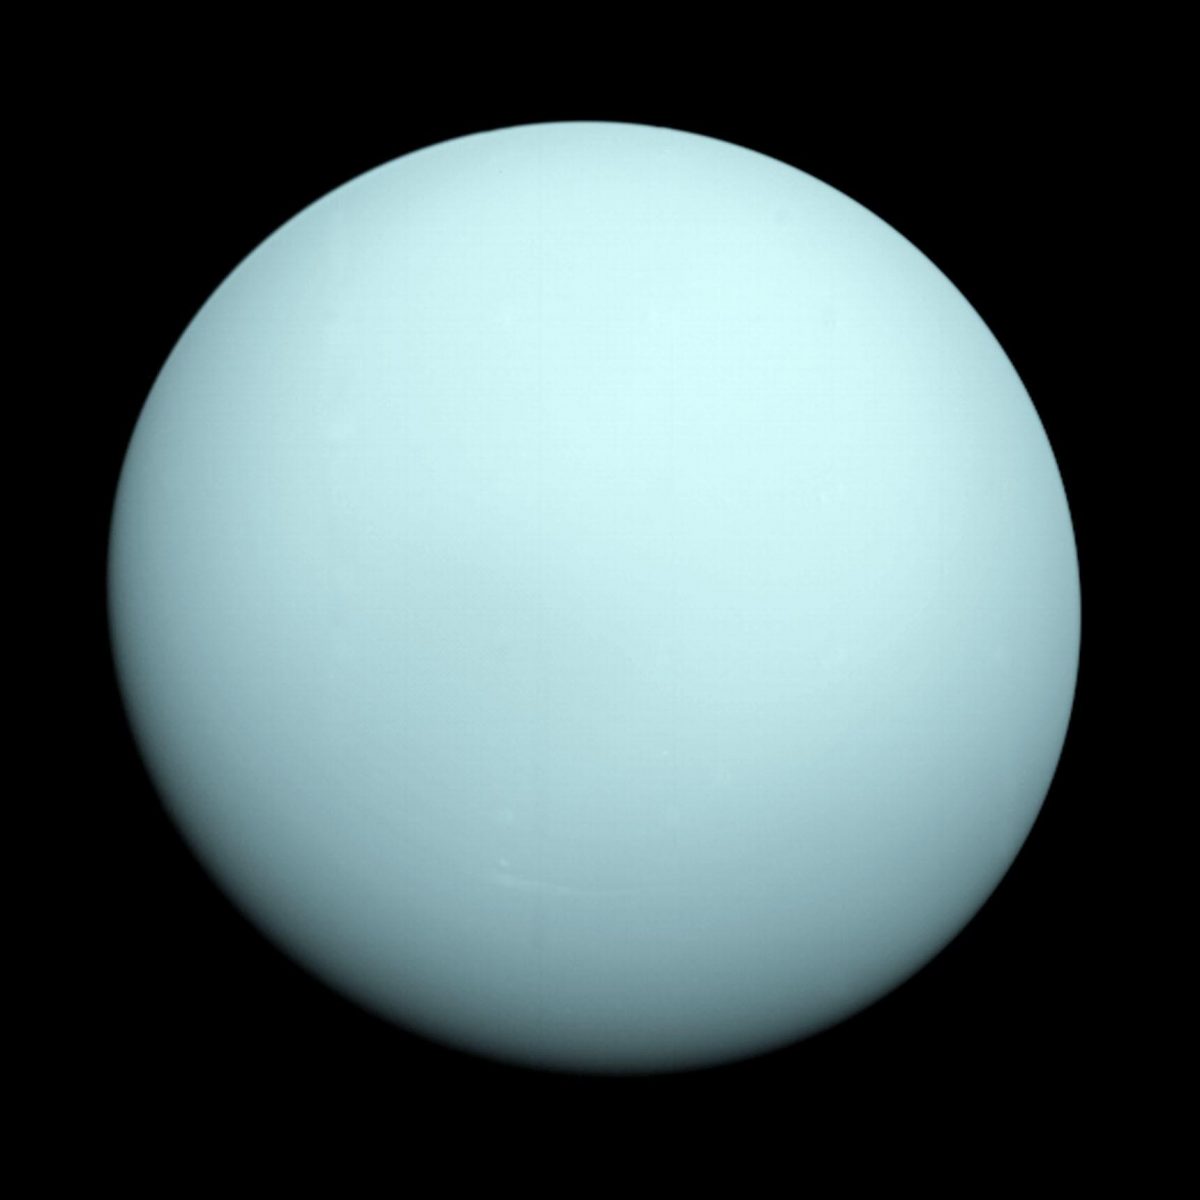 Uranus Smells Exactly How You Think It Does